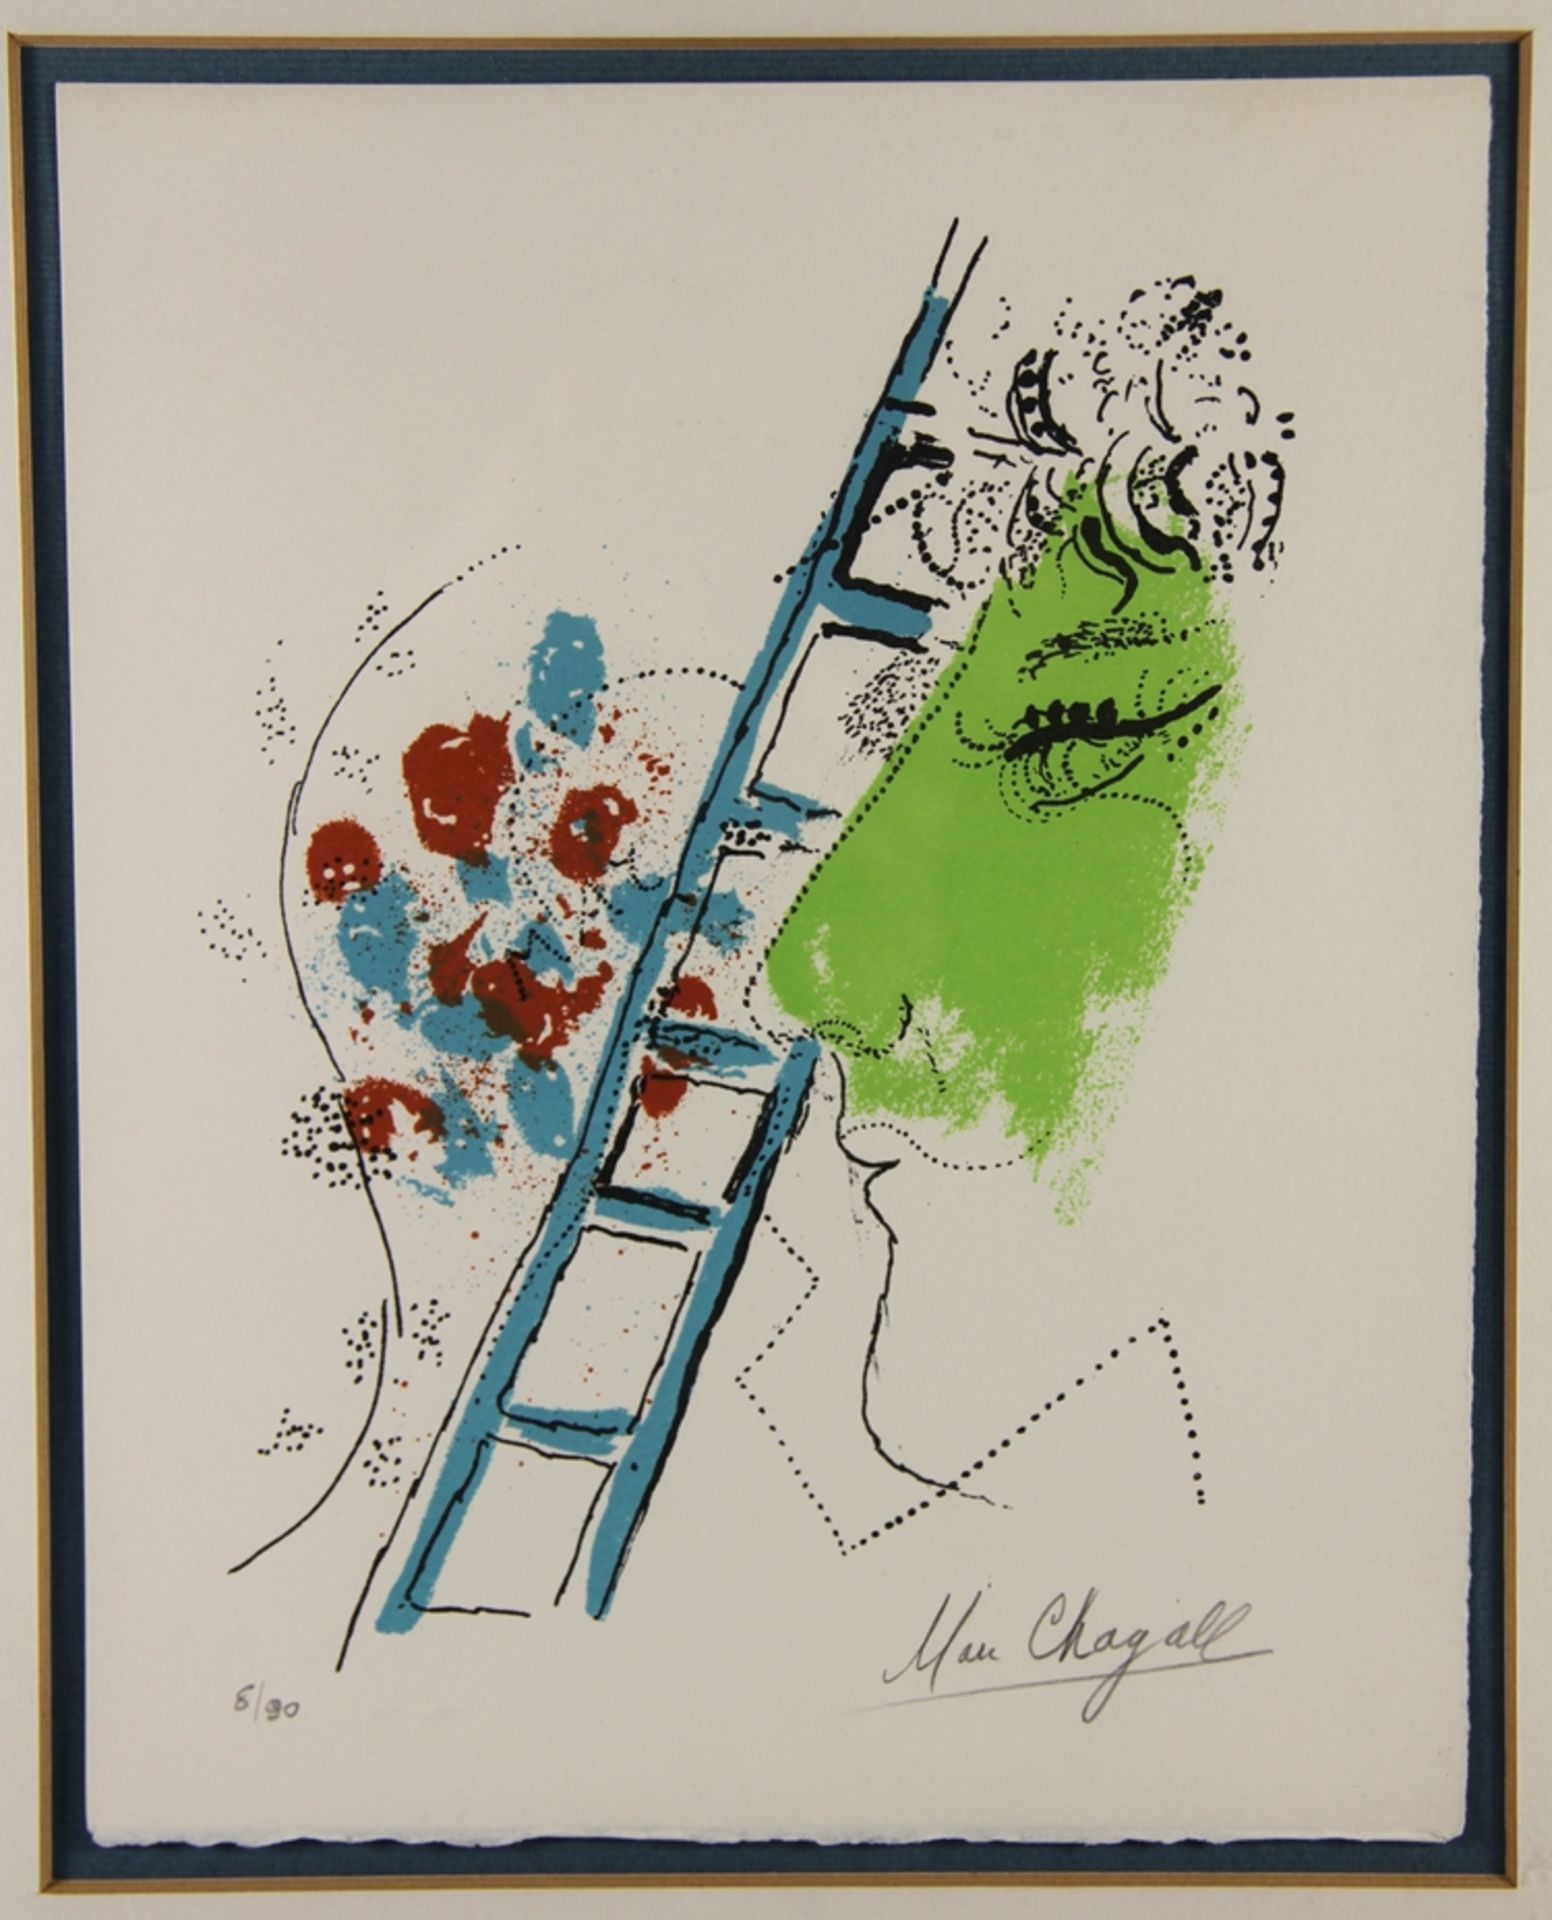 Chagall, Marc - Image 2 of 3